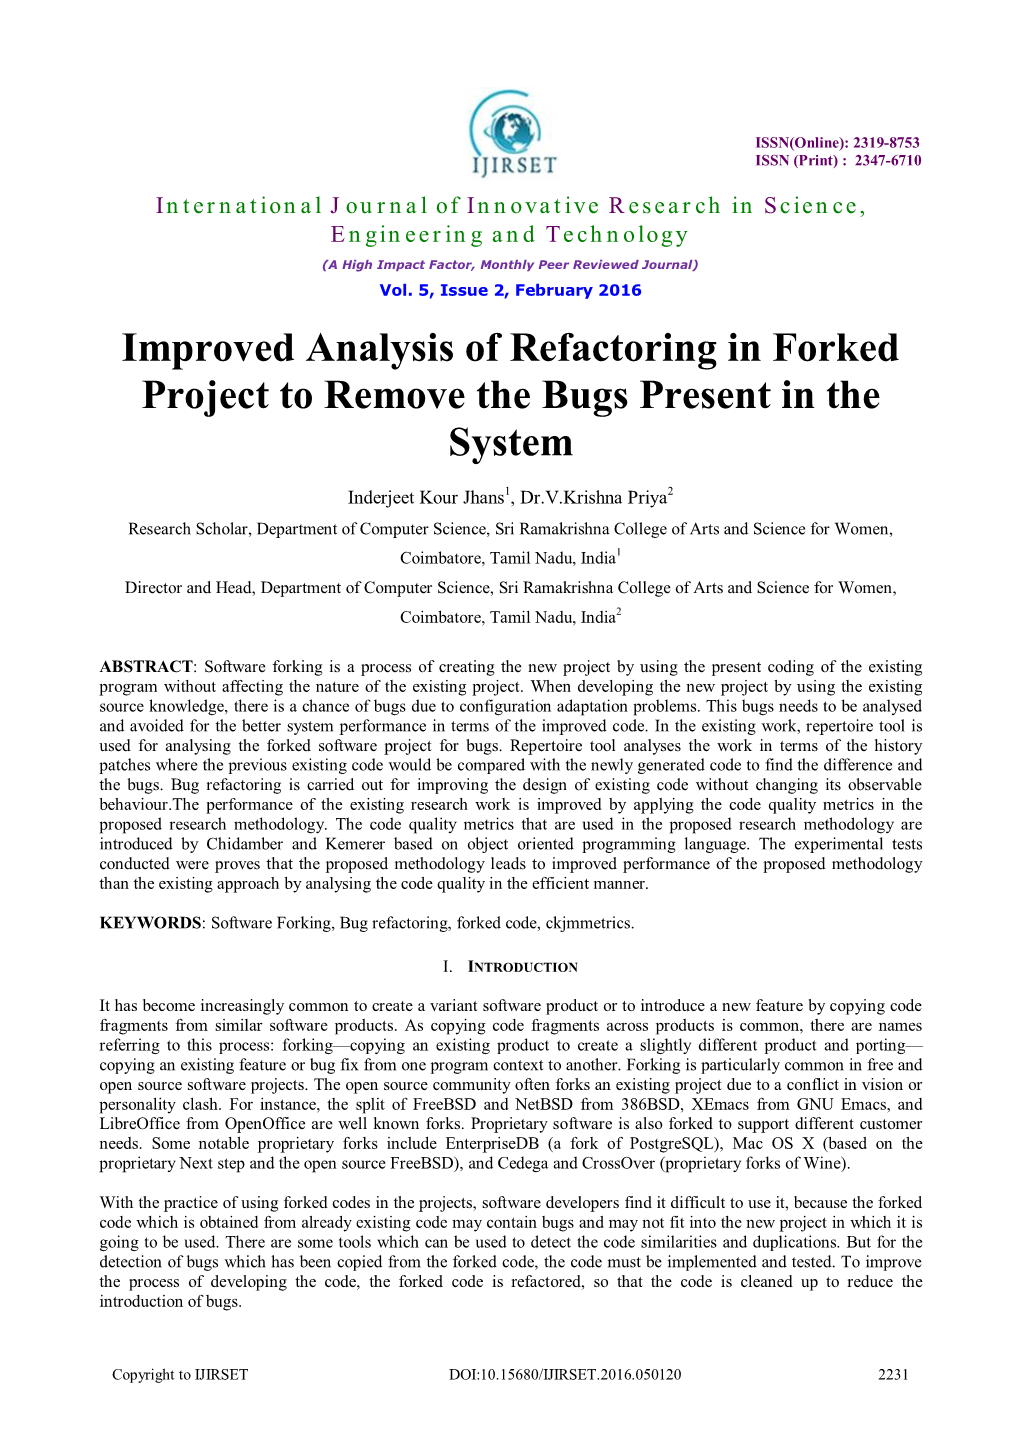 Improved Analysis of Refactoring in Forked Project to Remove the Bugs Present in the System